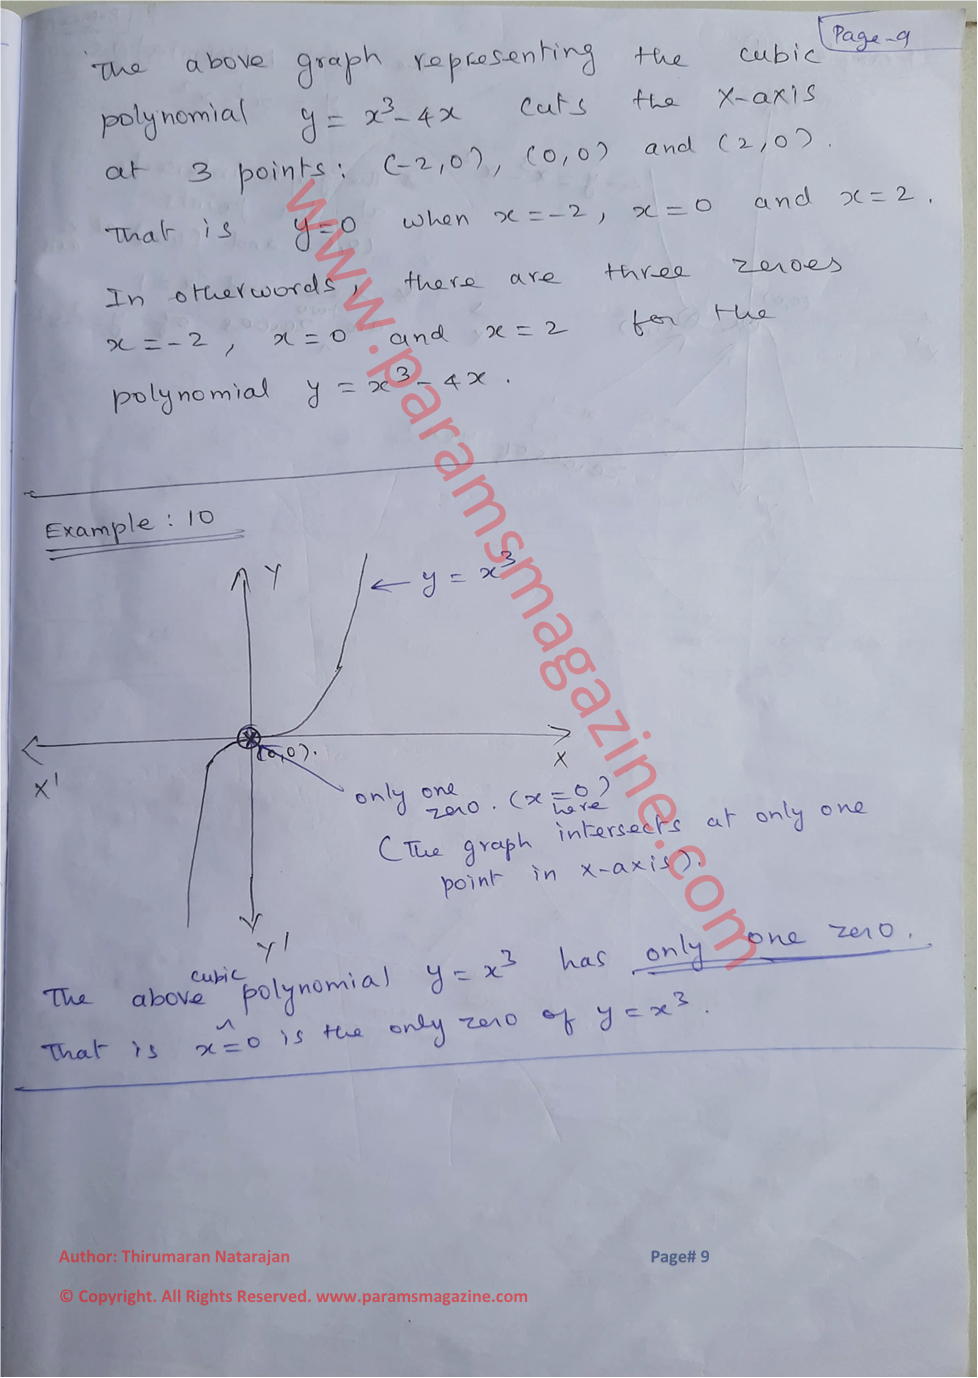 Class-10 - Polynomials - Notes - Page-9